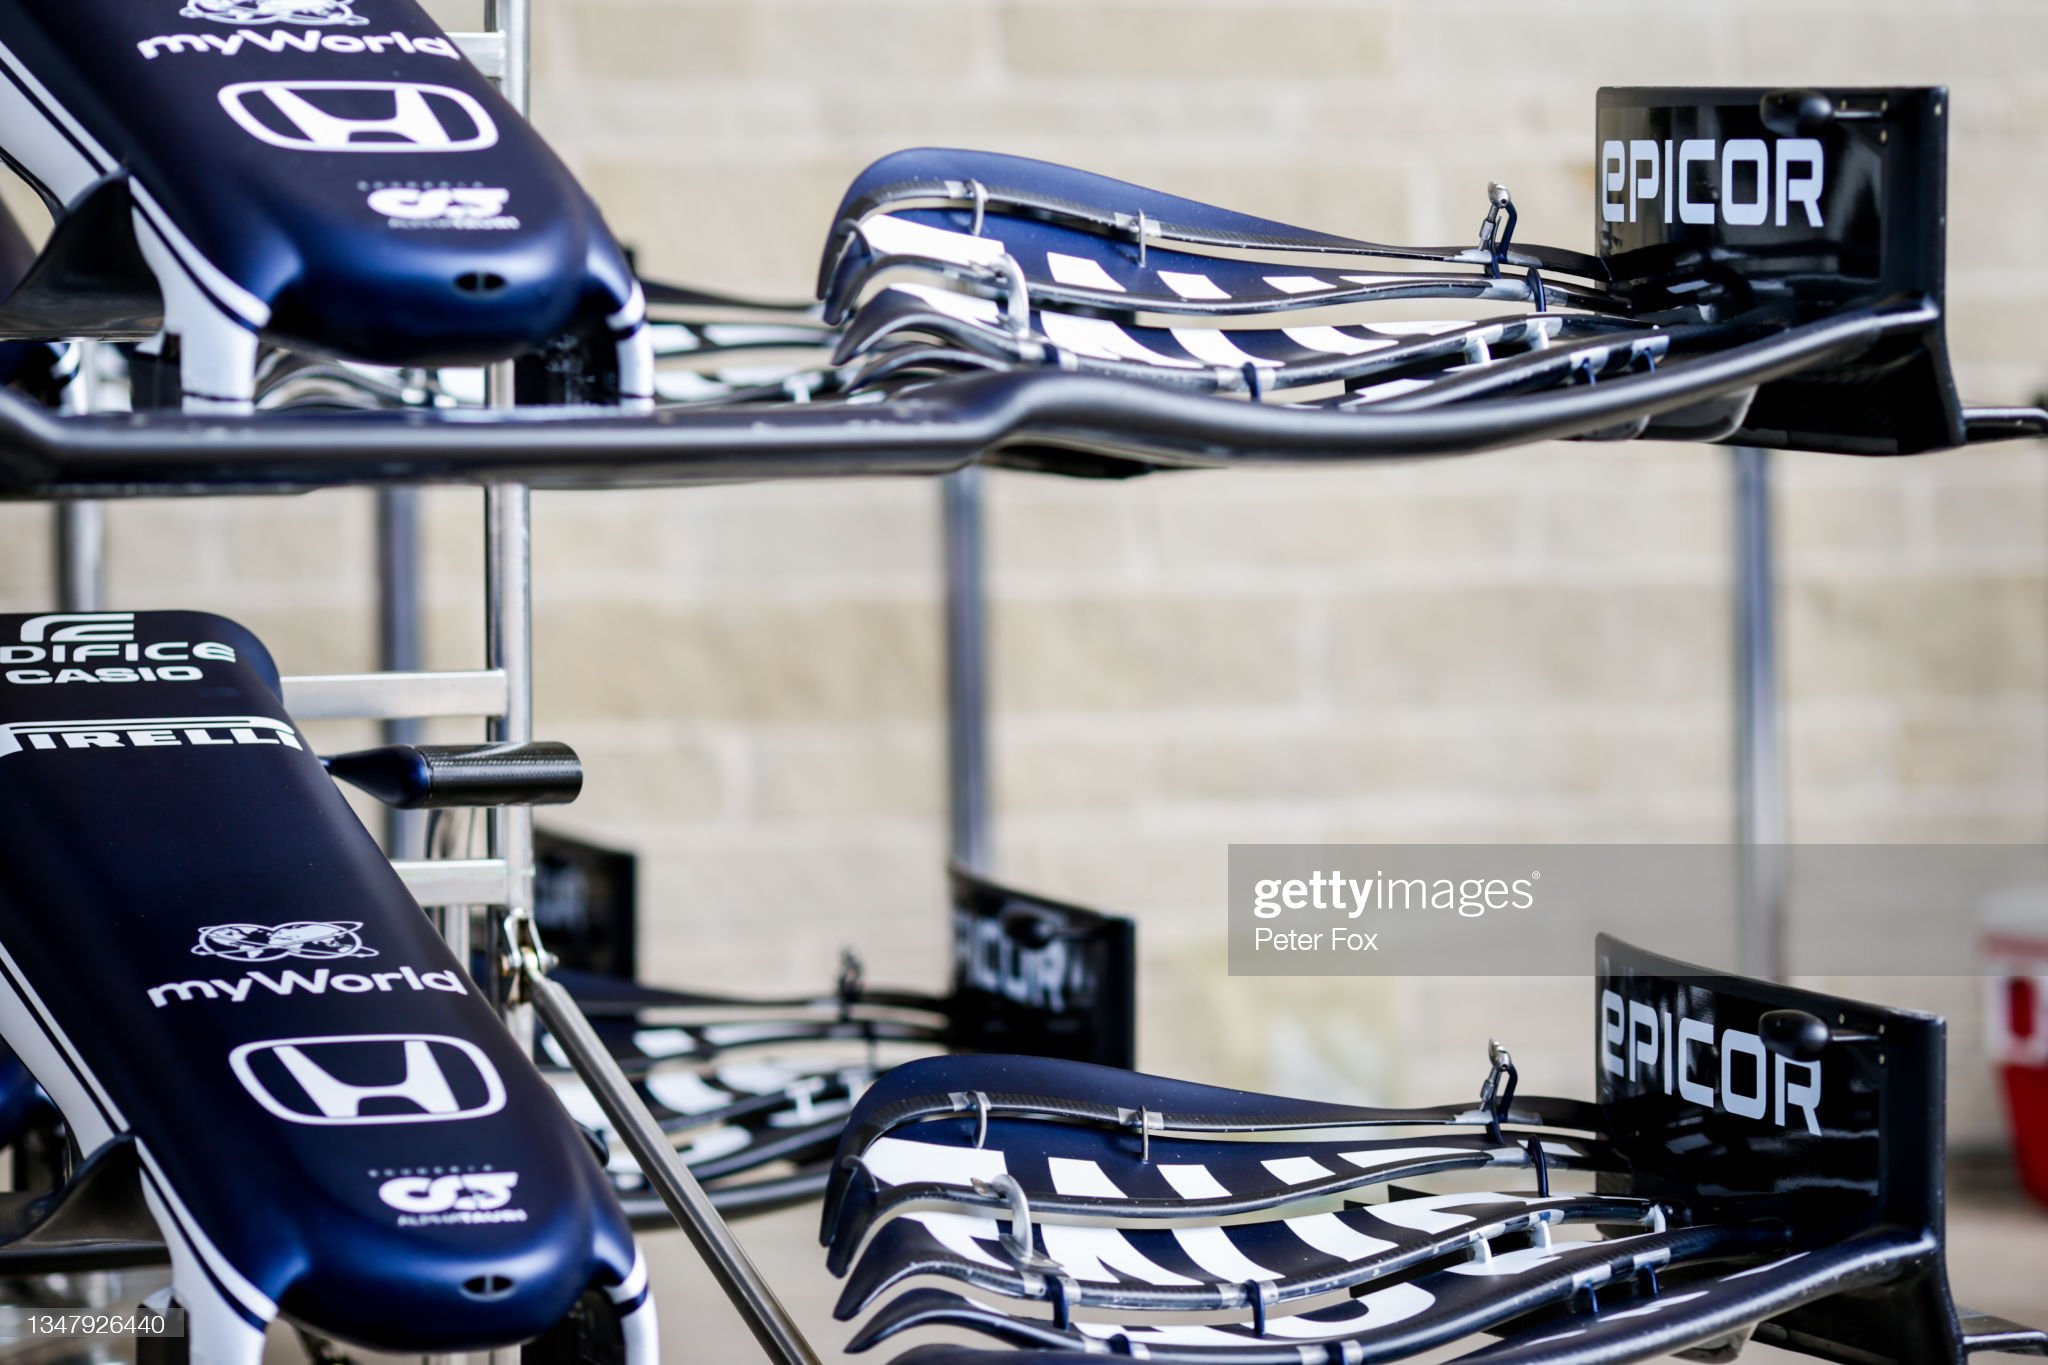 Scuderia Alpha Tauri's new sponsor Epicor on the front wing during previews ahead of the F1 Grand Prix of USA at Circuit of The Americas on 21 October 2021 in Austin, Texas. 